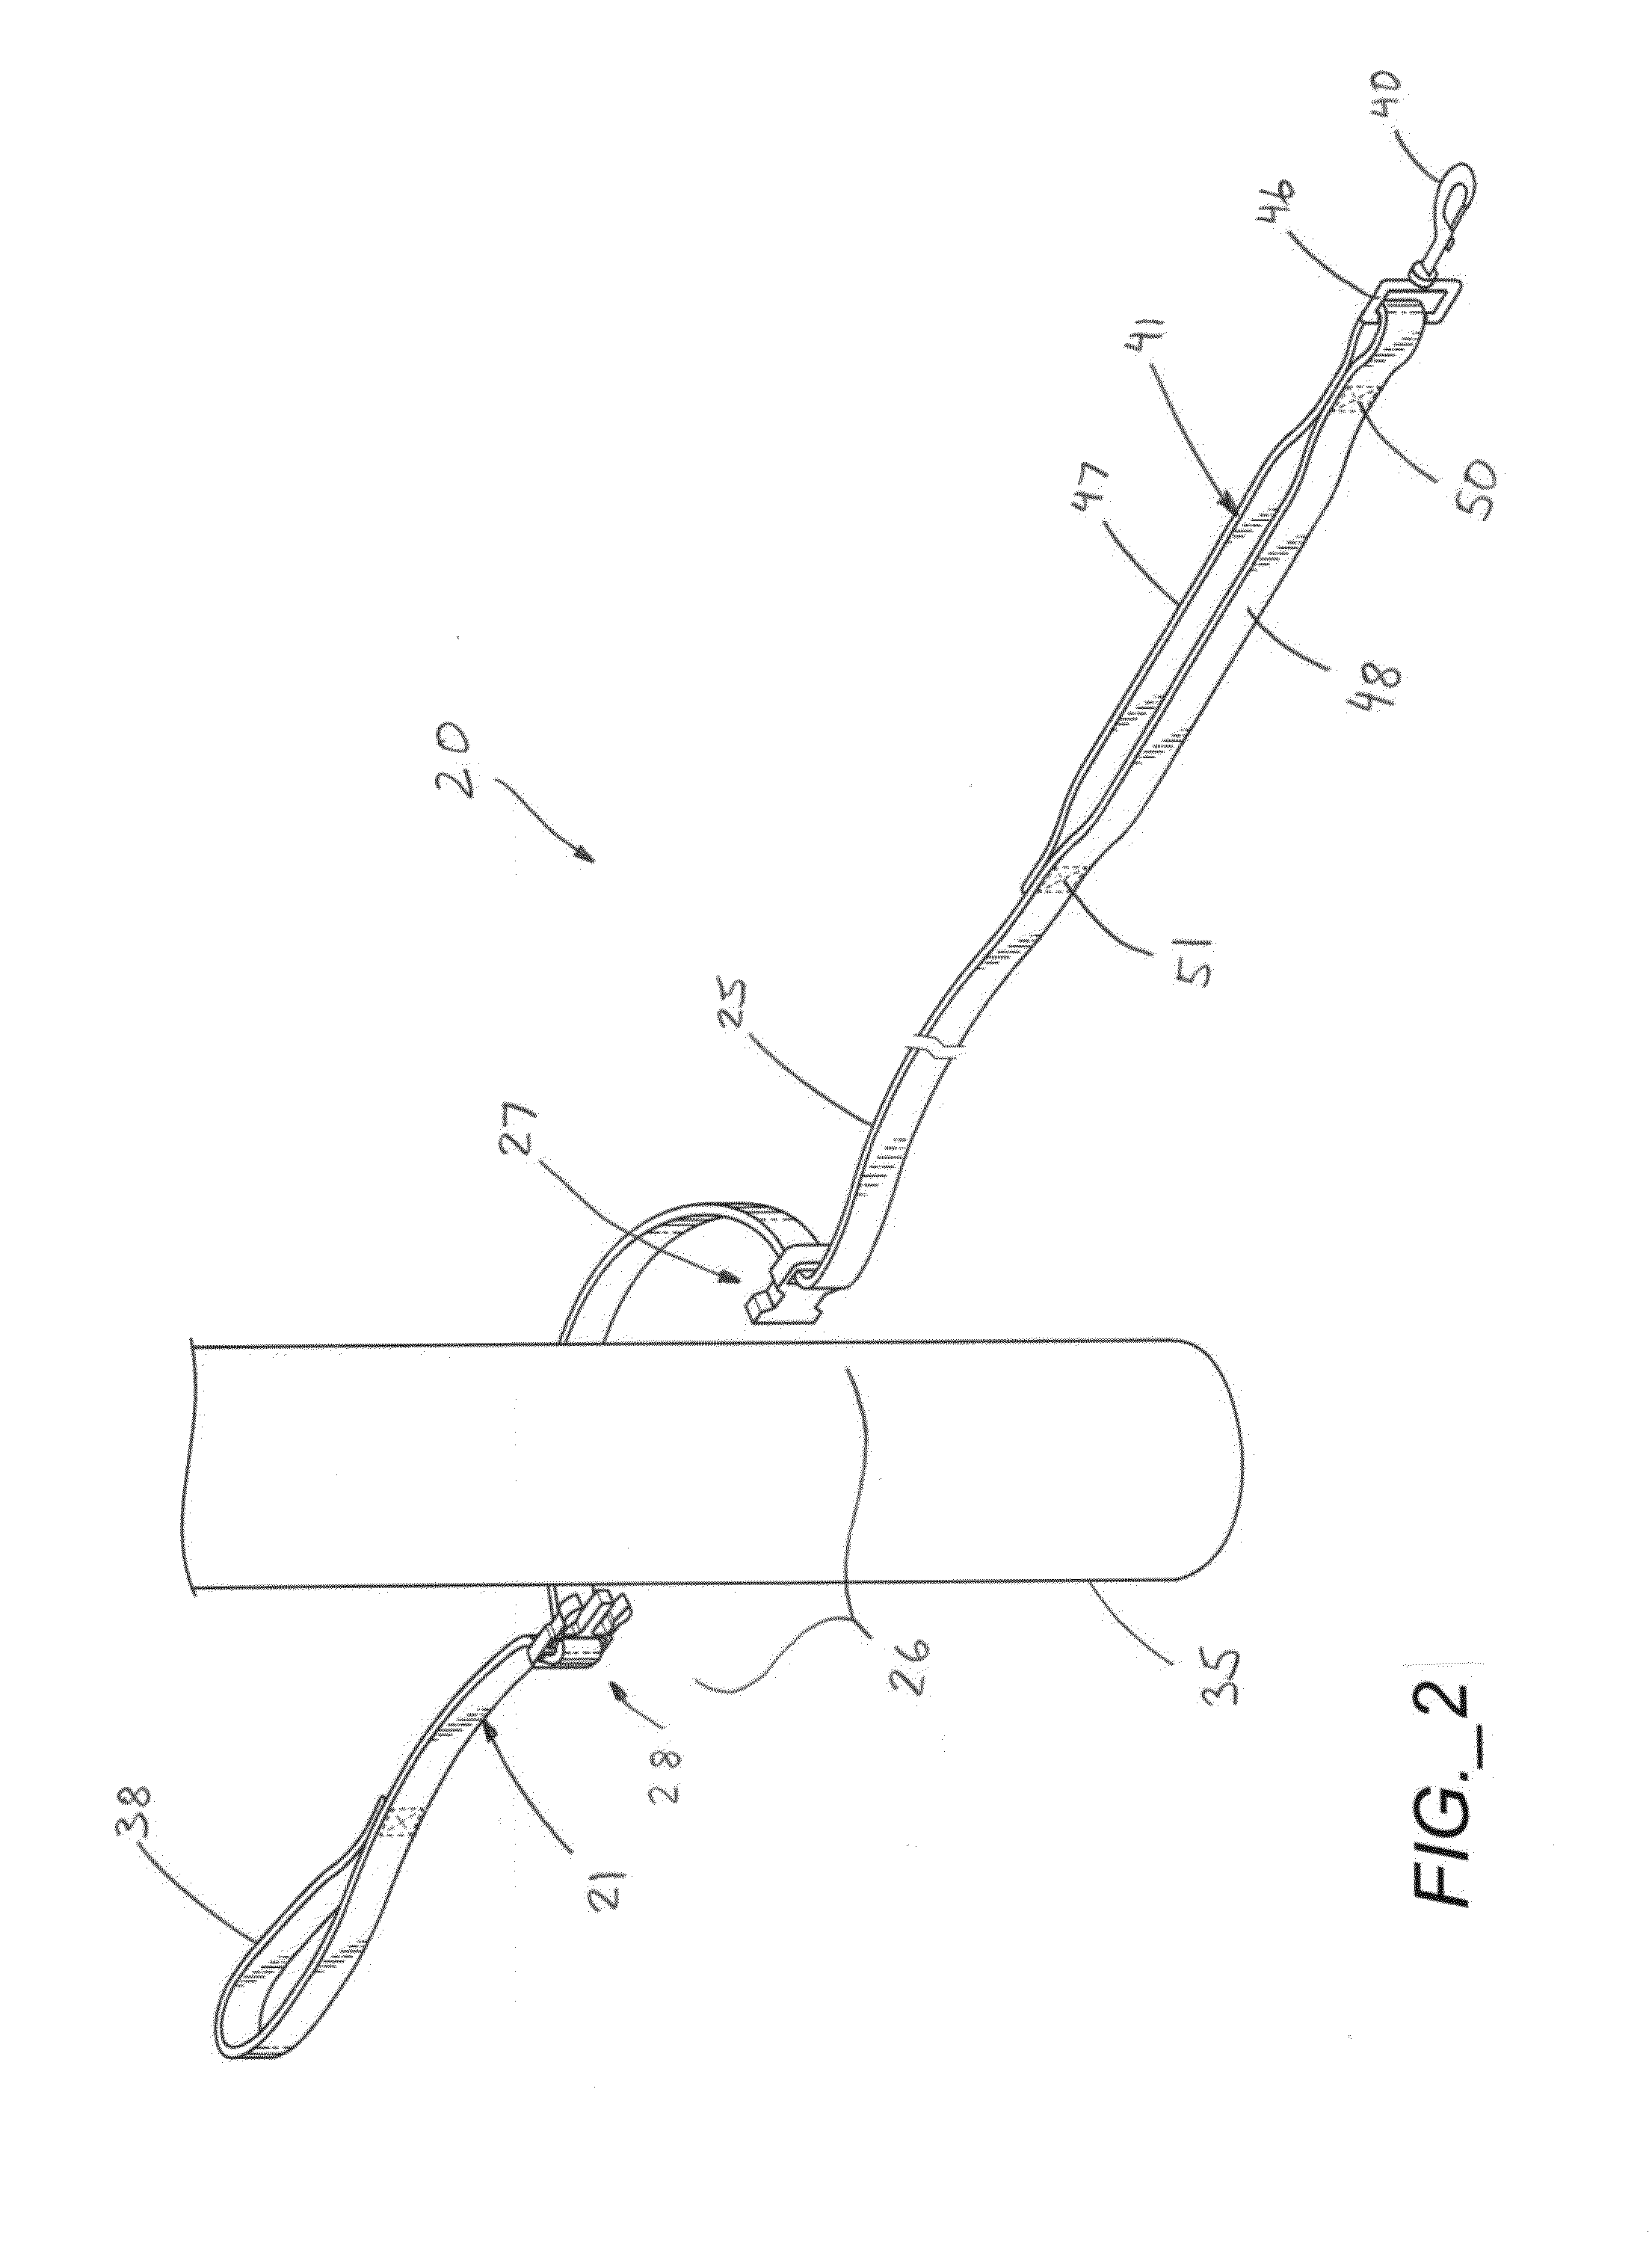 Leash assembly with quick release apparatus